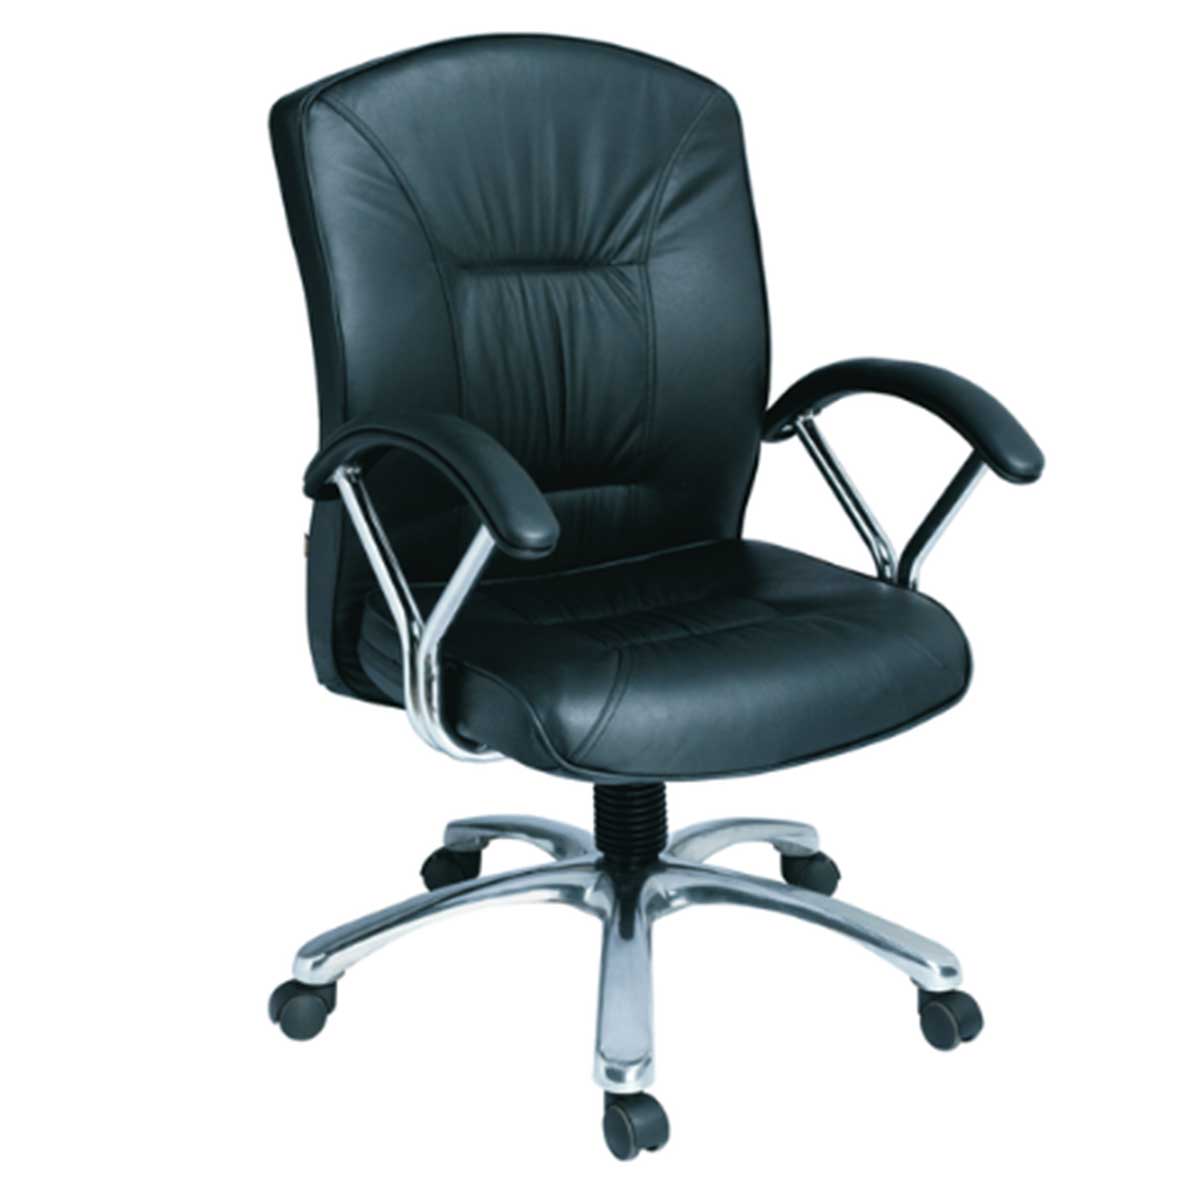 Executive Chair Manufacturers, Suppliers in Greater Kailash Ii